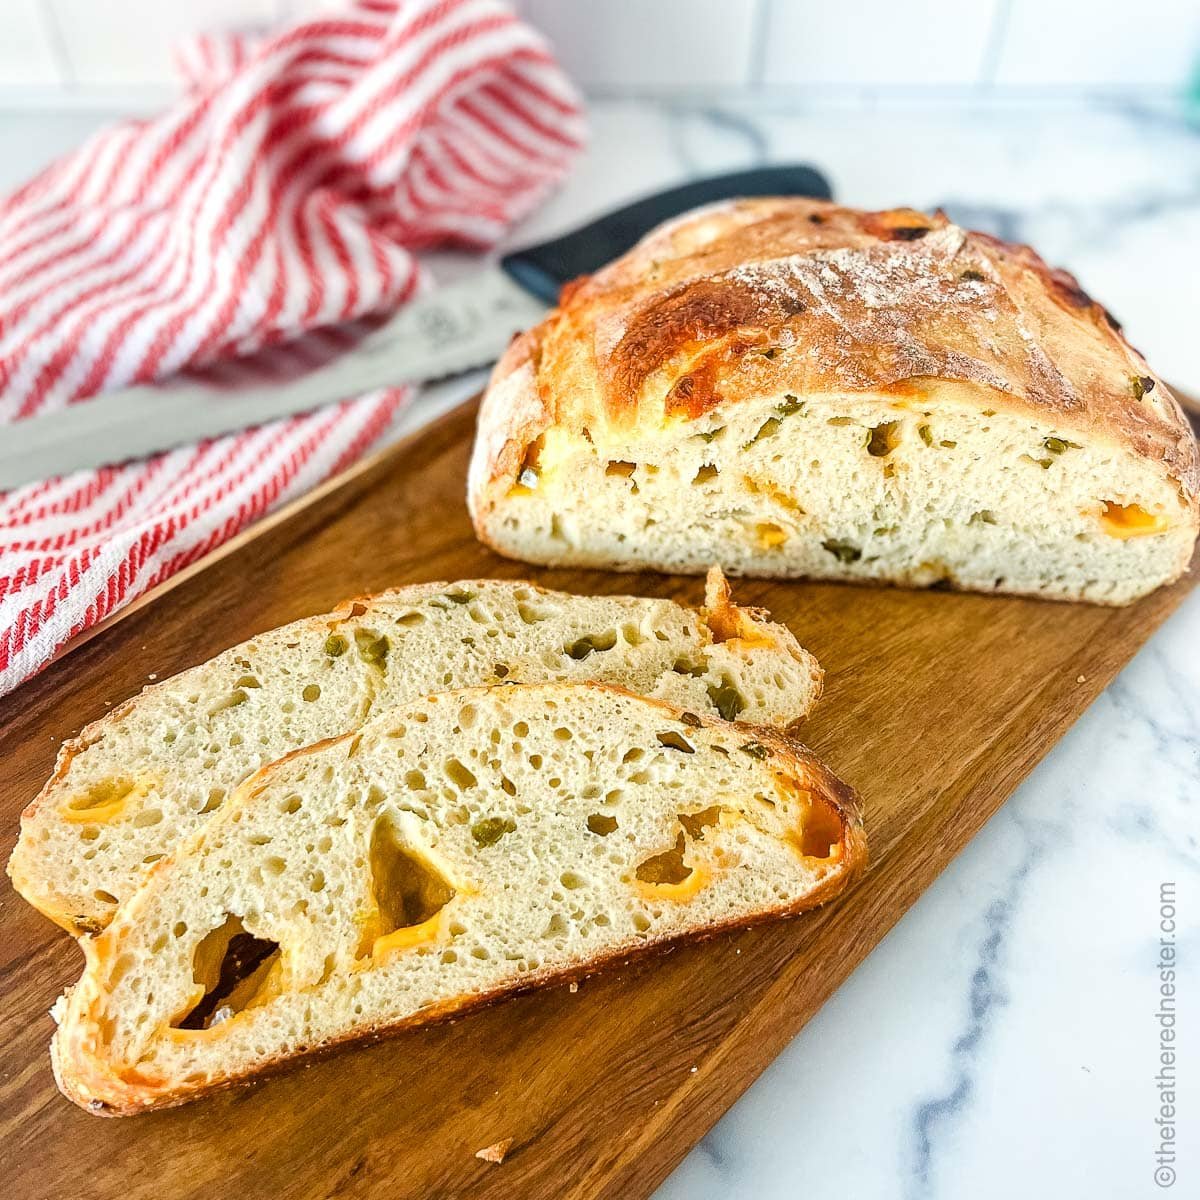 Dutch Oven Sourdough Bread with Pickled Jalapeños and Cheddar